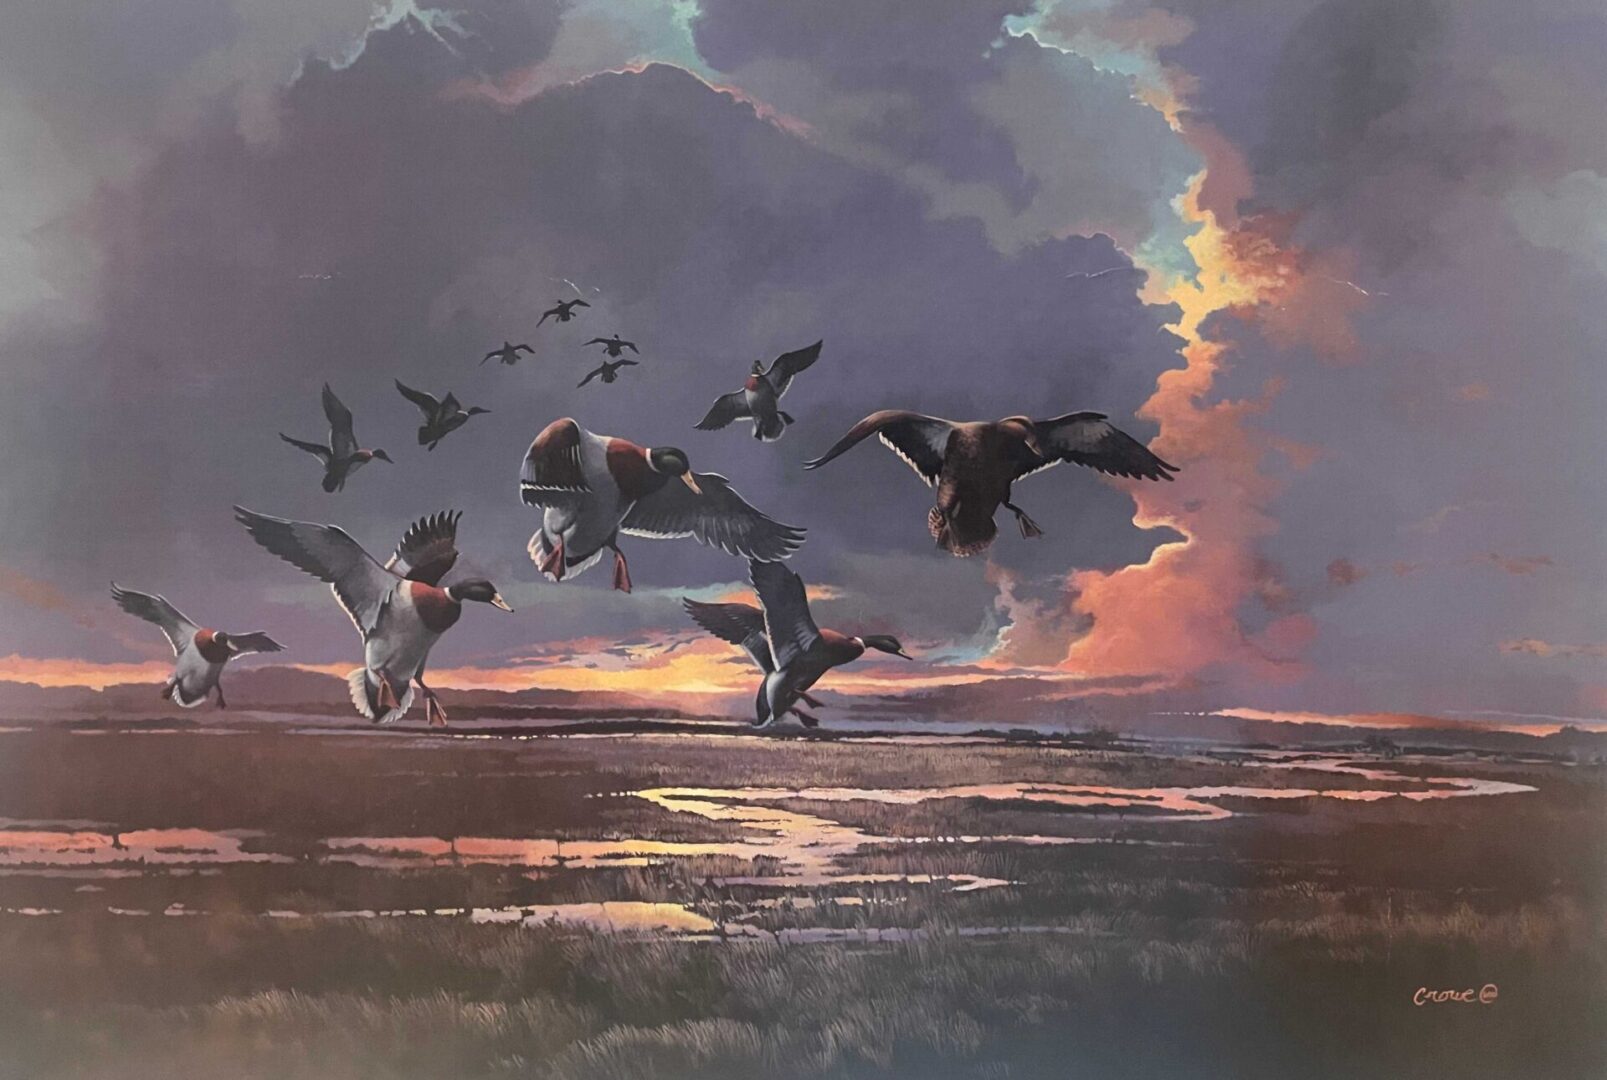 A painting of birds flying in the sky